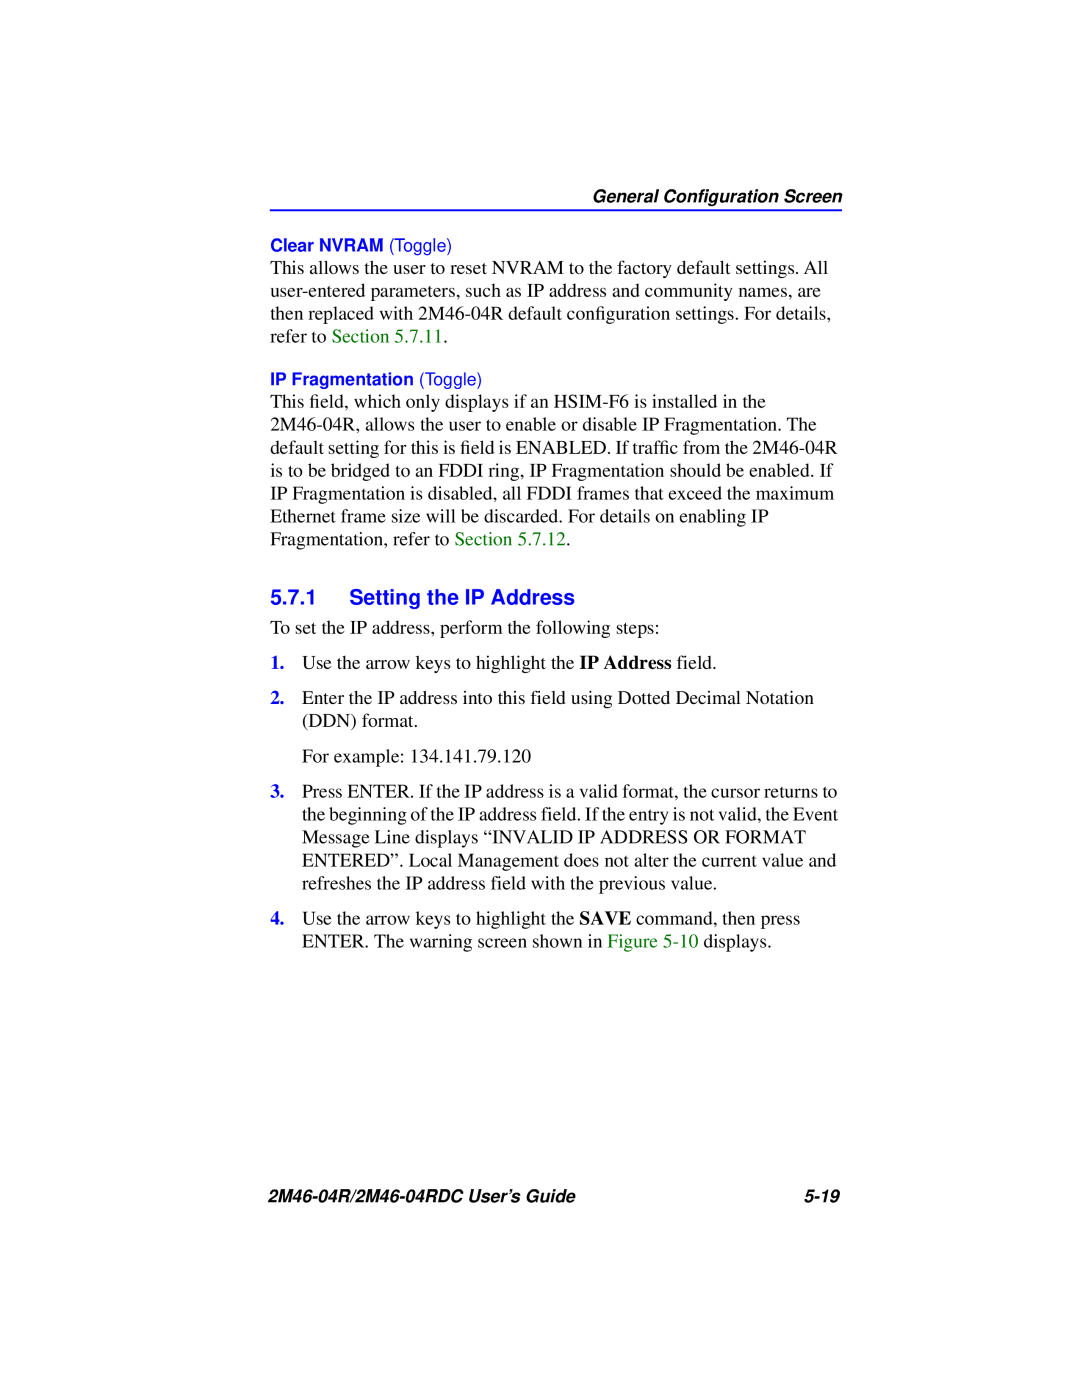 Cabletron Systems pmn manual Setting the IP Address 